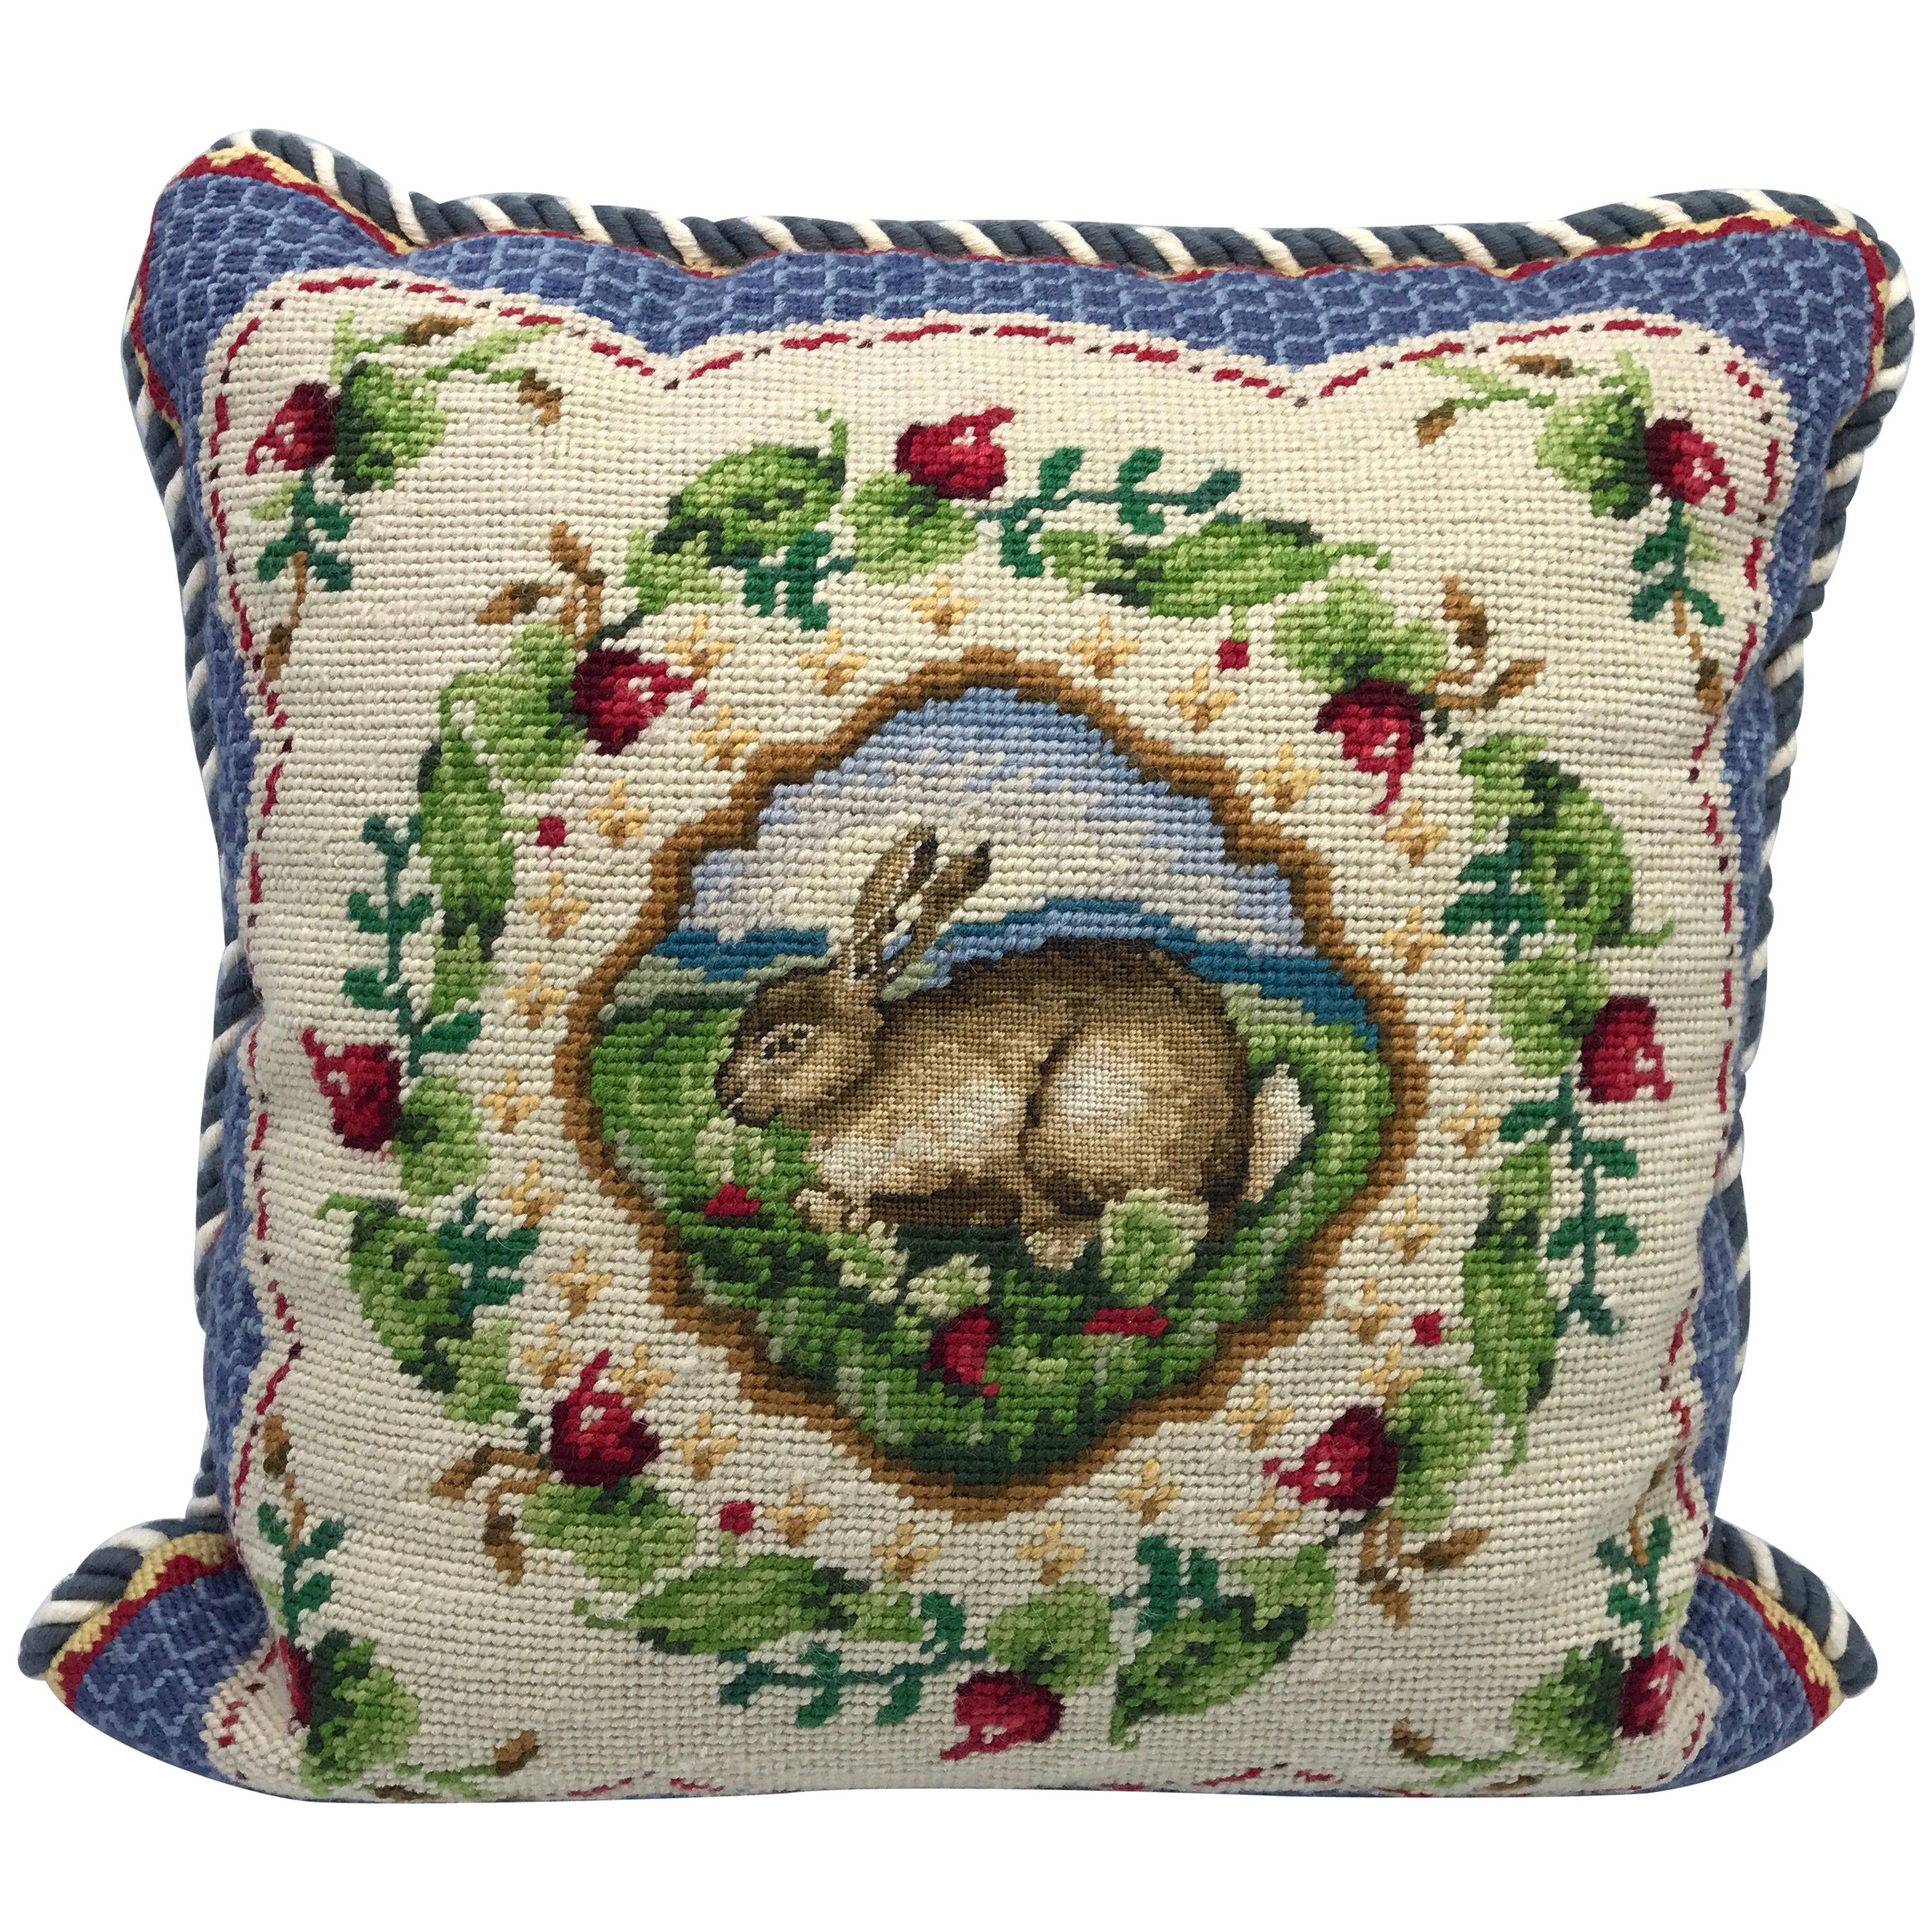 Blue and White Needlepoint Pillow with Floral and Rabbit-Hare Motif, 1960s For Sale